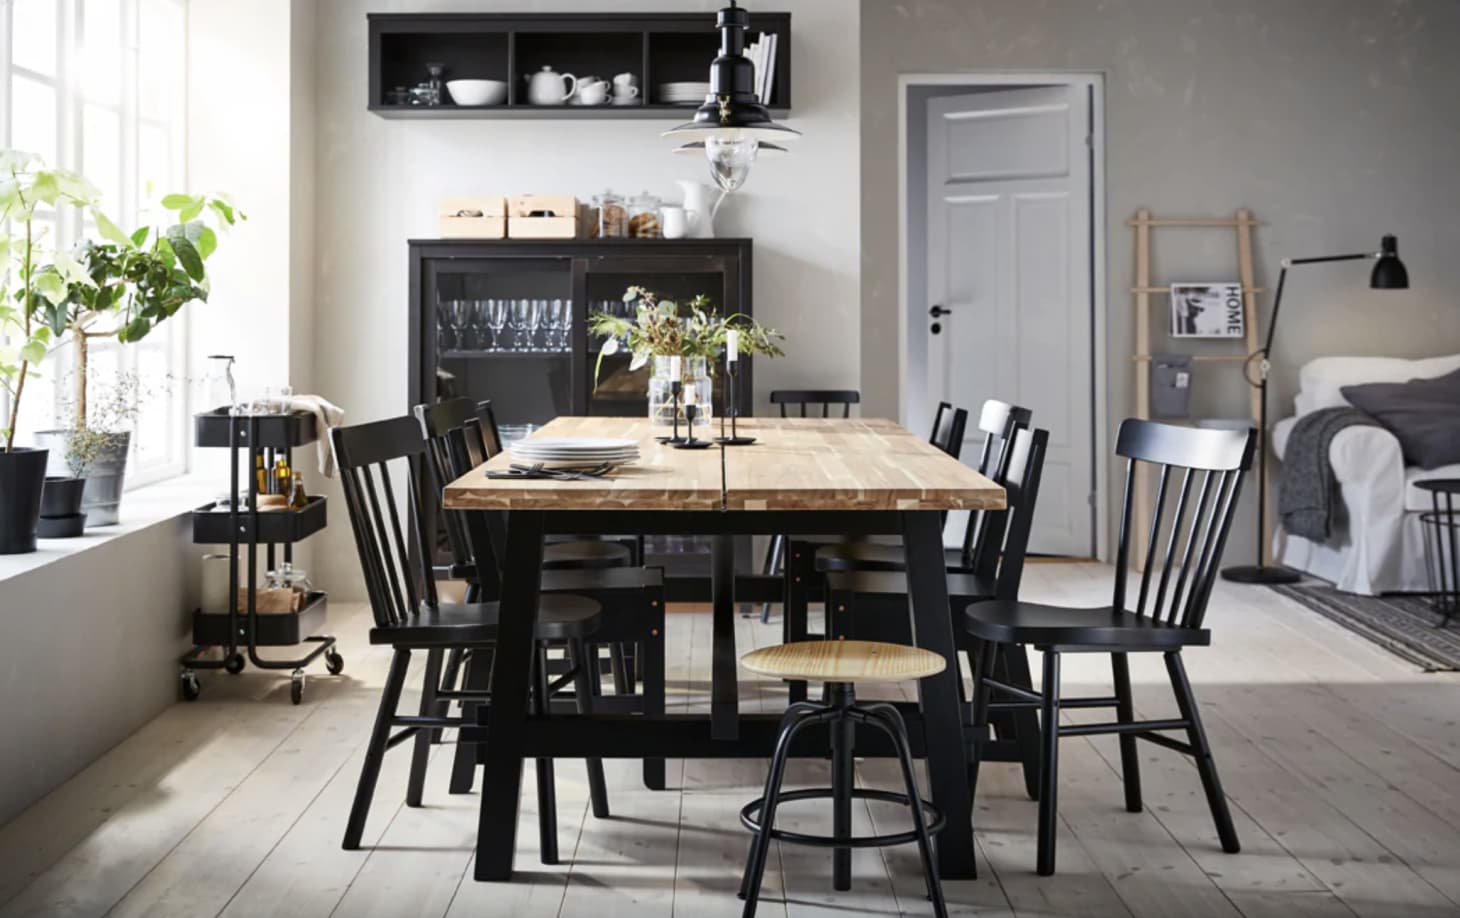 Clever Dining Room Design Ideas to Steal From IKEA | Apartment Therapy